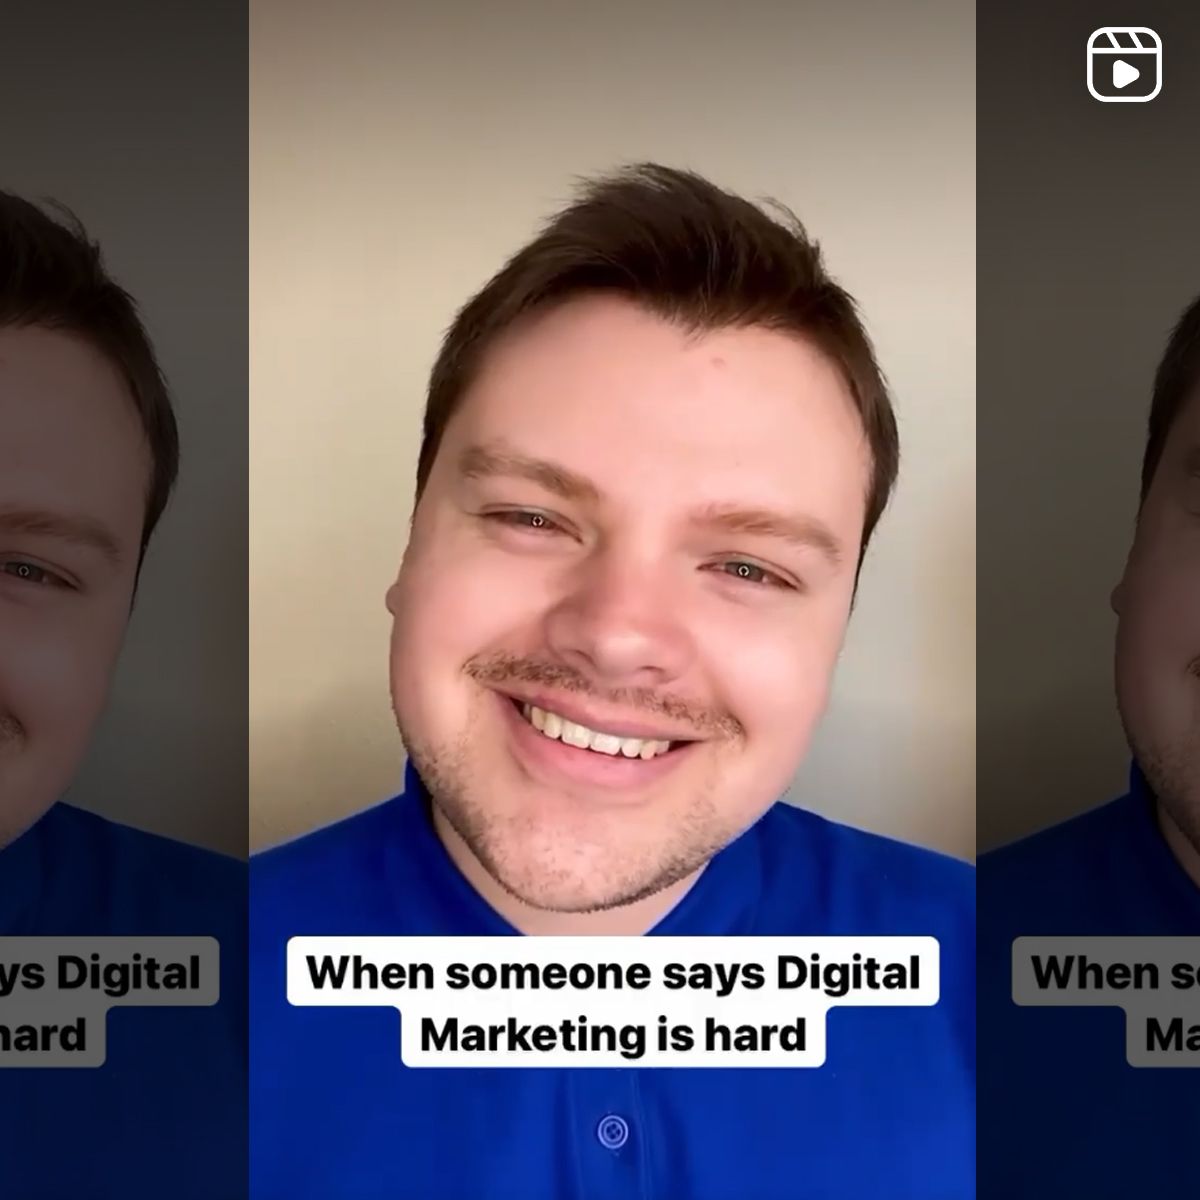 When Someone Says Digitial Marketing is Hard